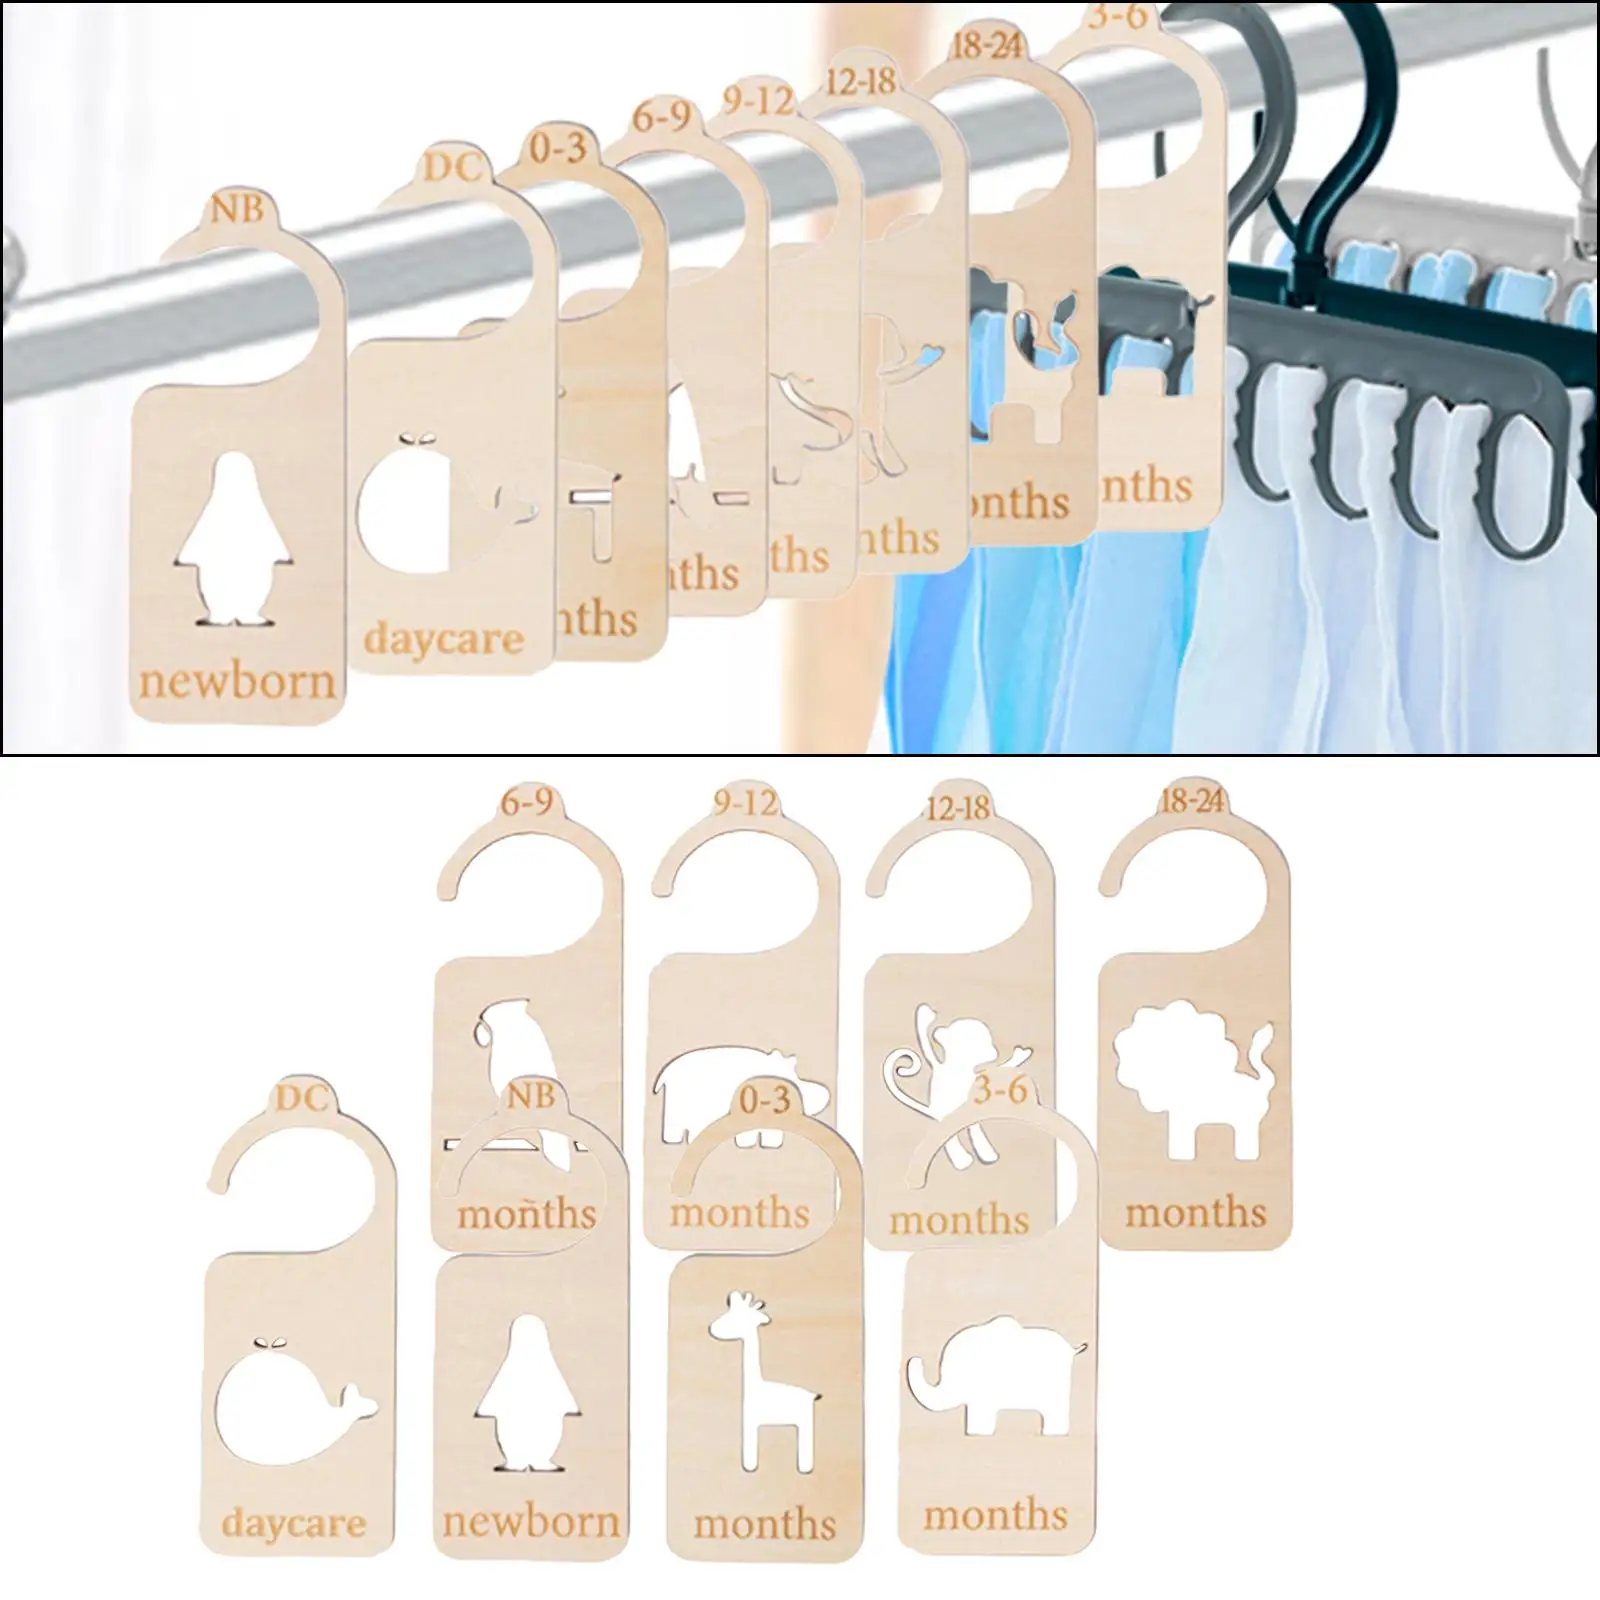 8Pcs Wooden Baby Closet Dividers Baby Clothes Dividers Hanger Double Sided Easily Organize for Closet Wardrobe Nursery Decors